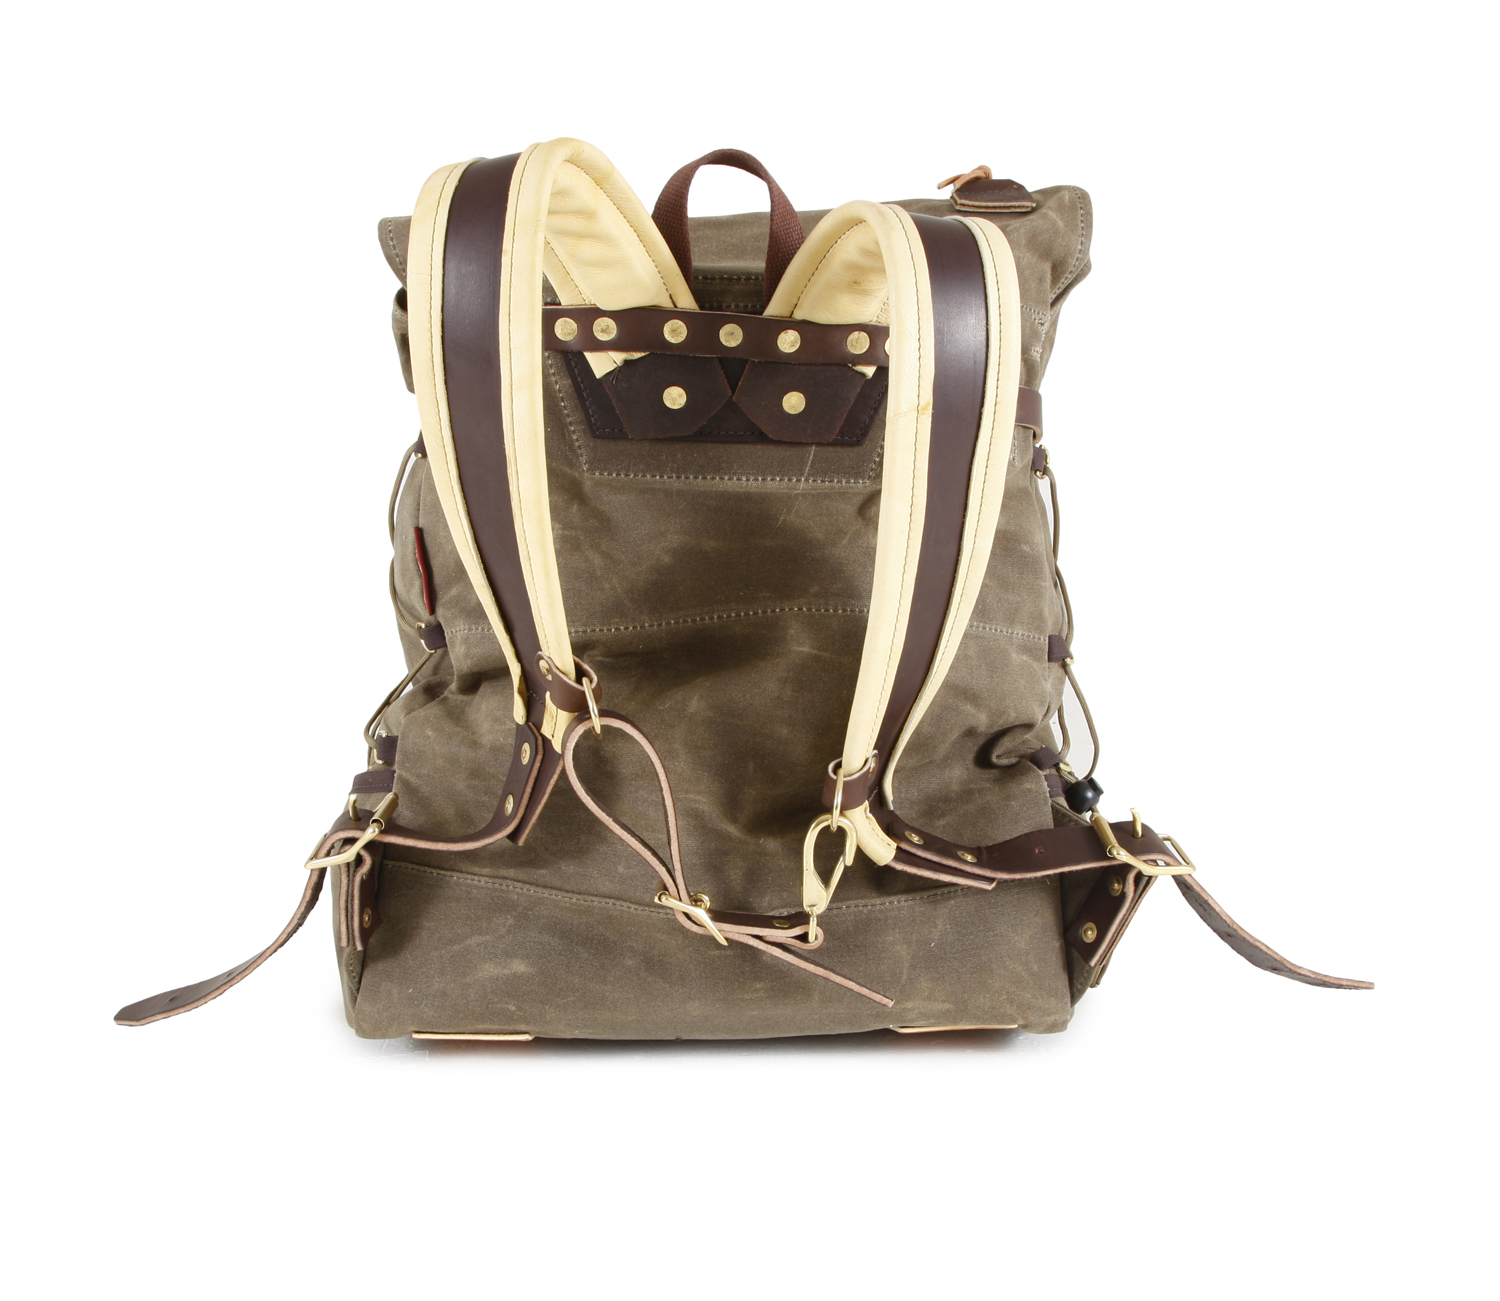  Frost River Isle Royale Mini Bushcraft Backpack - Durable Waxed  Canvas Outdoor Hiking Pack, 18 Liter, Field Tan : Sports & Outdoors